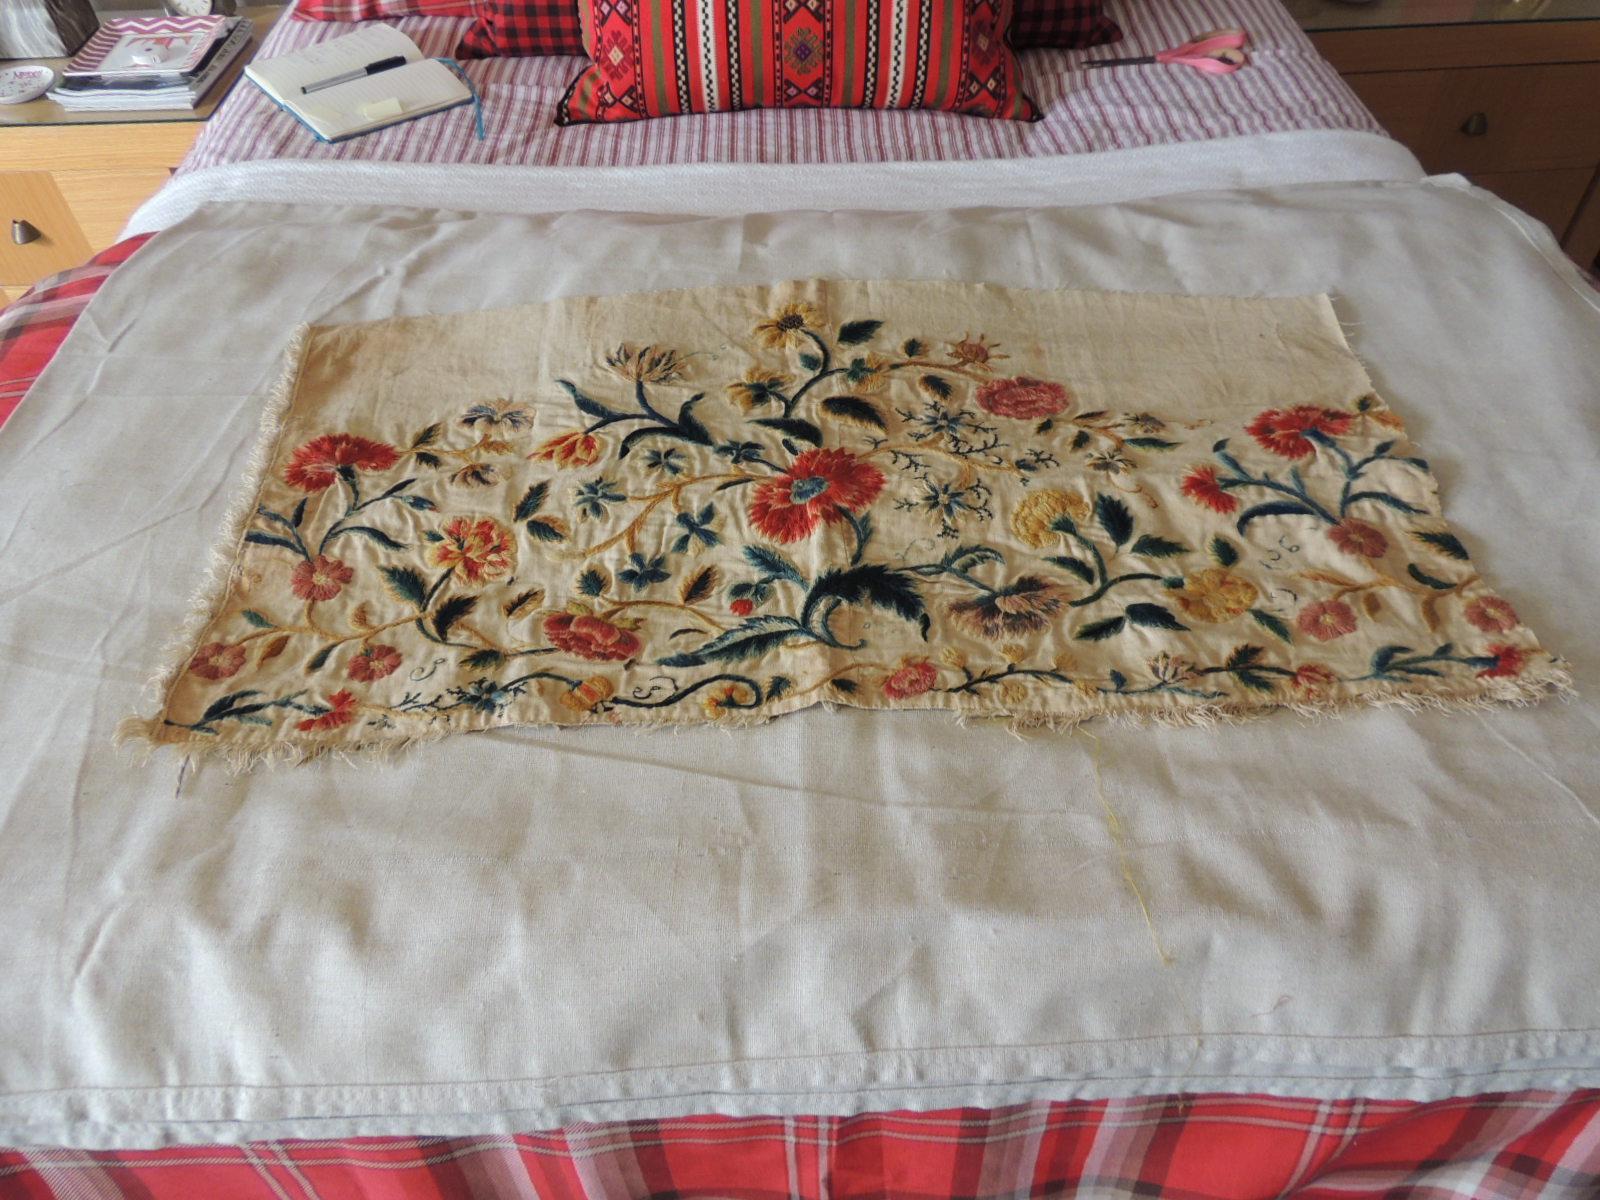 Antique green and red crewel work embroidery floral textile panel.
Ideal for pillows and upholstery.
Size: 18 x 35 x 0.25.